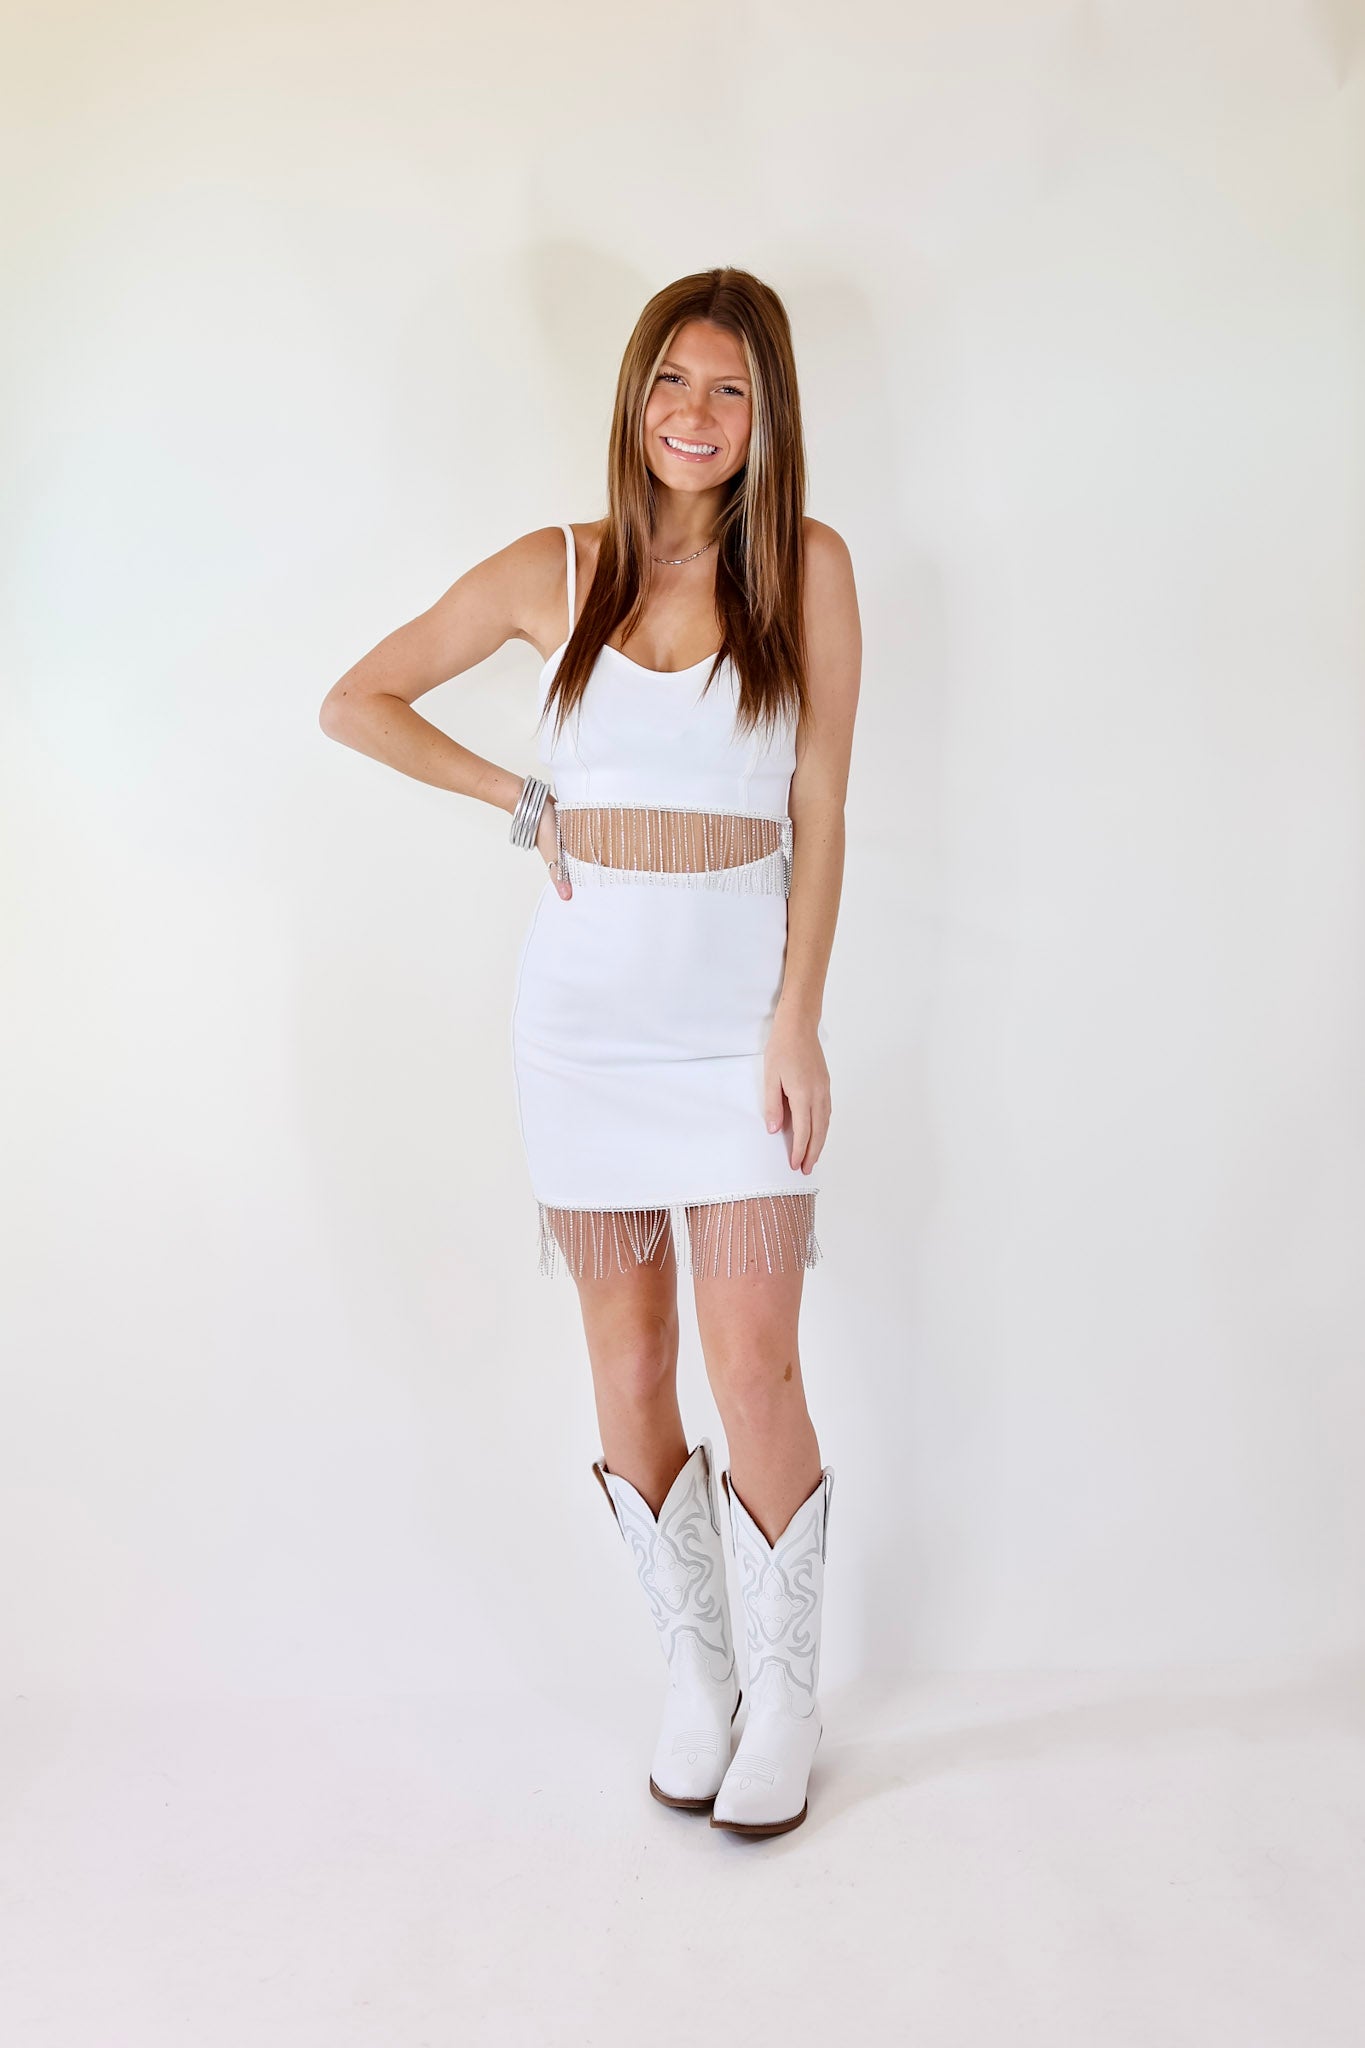 On The List Skirt with Crystal Fringe Trim in White - Giddy Up Glamour Boutique